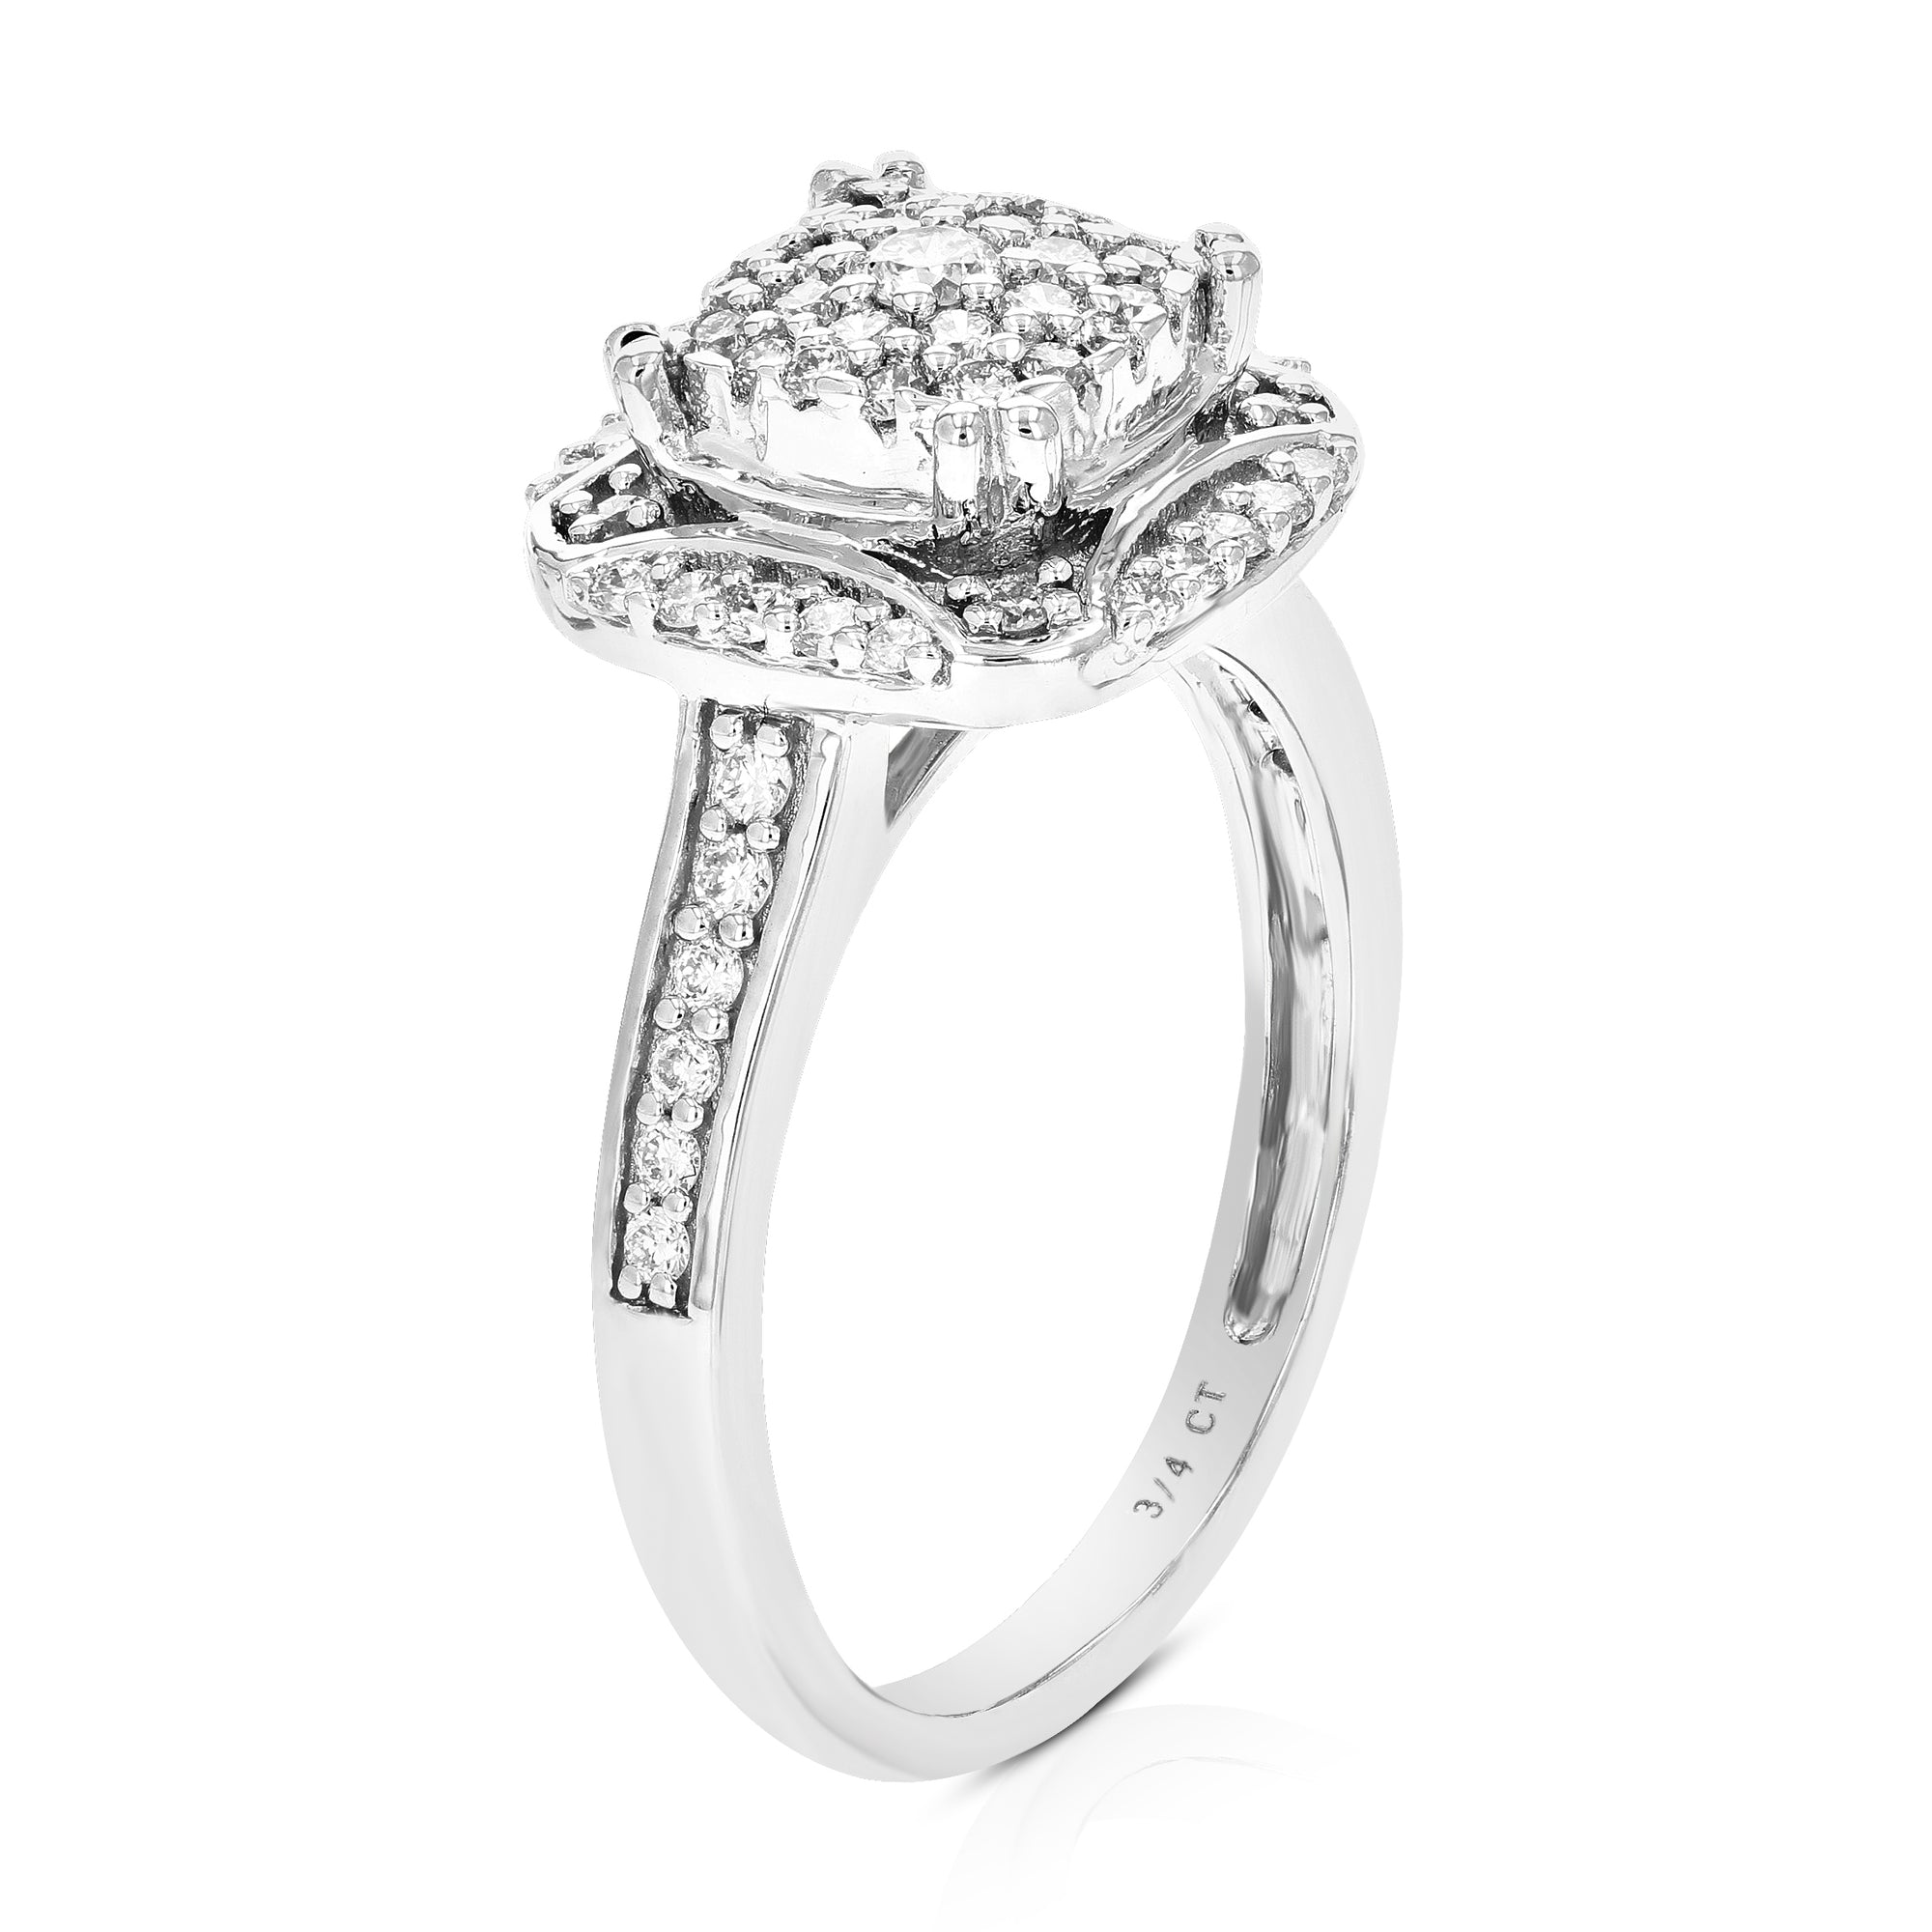 3/4 cttw Diamond Engagement Ring for Women, Round Lab Grown Diamond Ring in 0.925 Sterling Silver, Prong Setting, Size 6-8